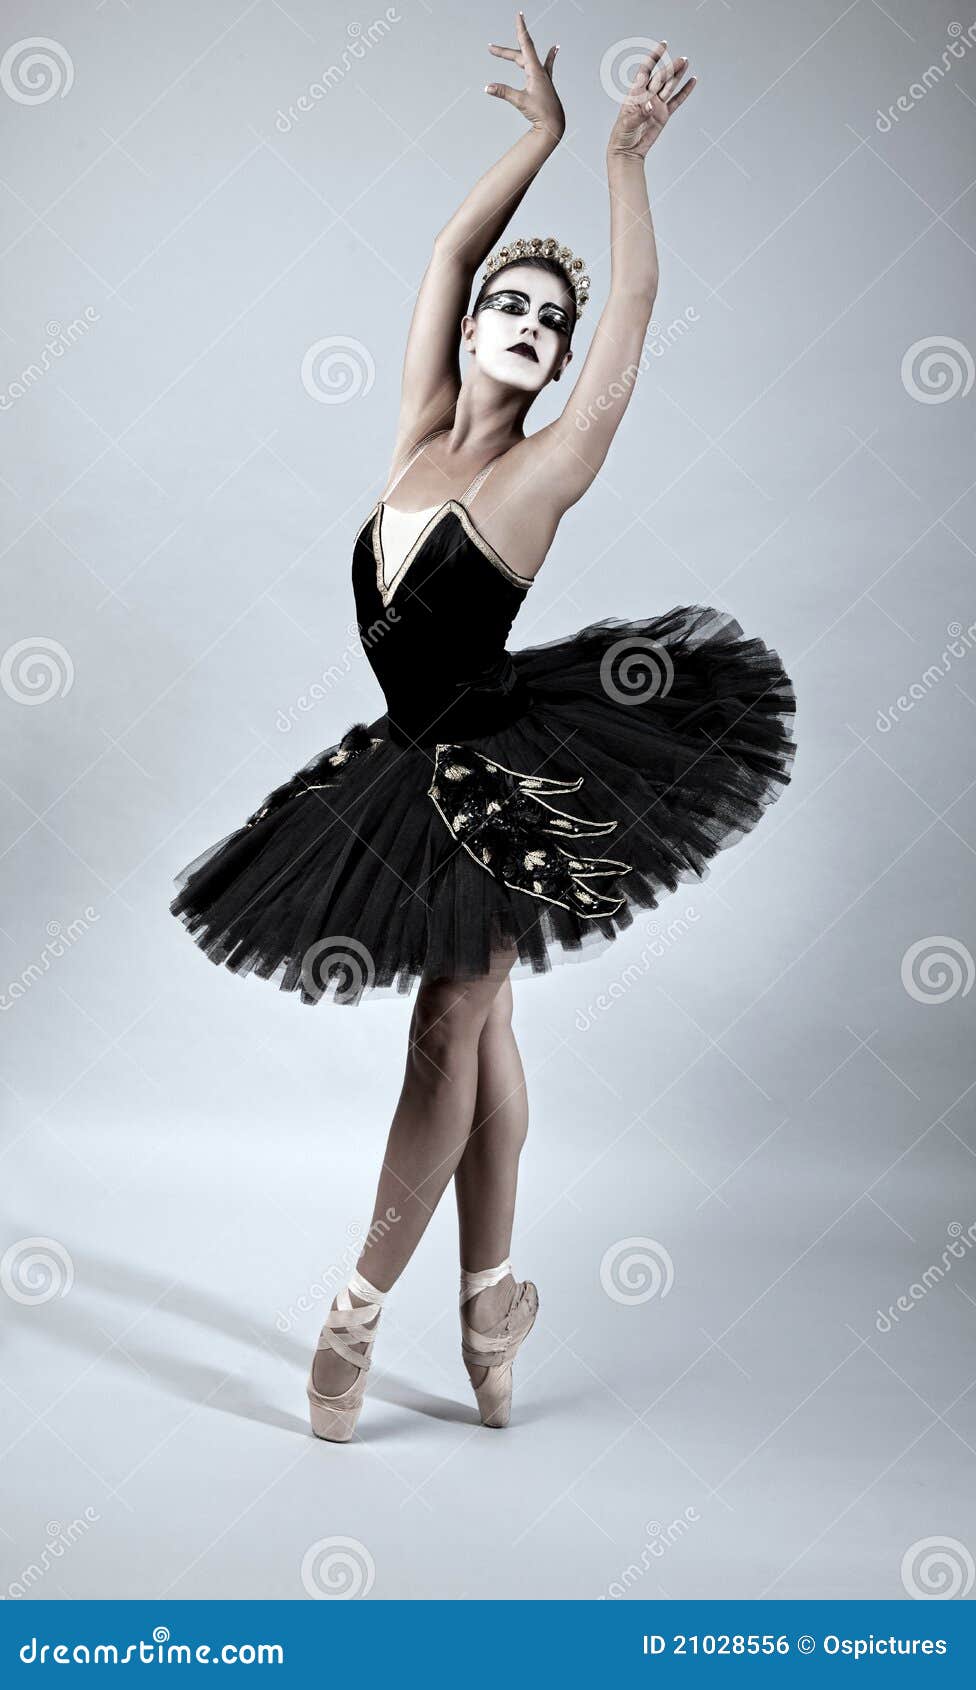 833 Black Ballet Dancer Photos - Free Royalty-Free Stock Photos from Dreamstime